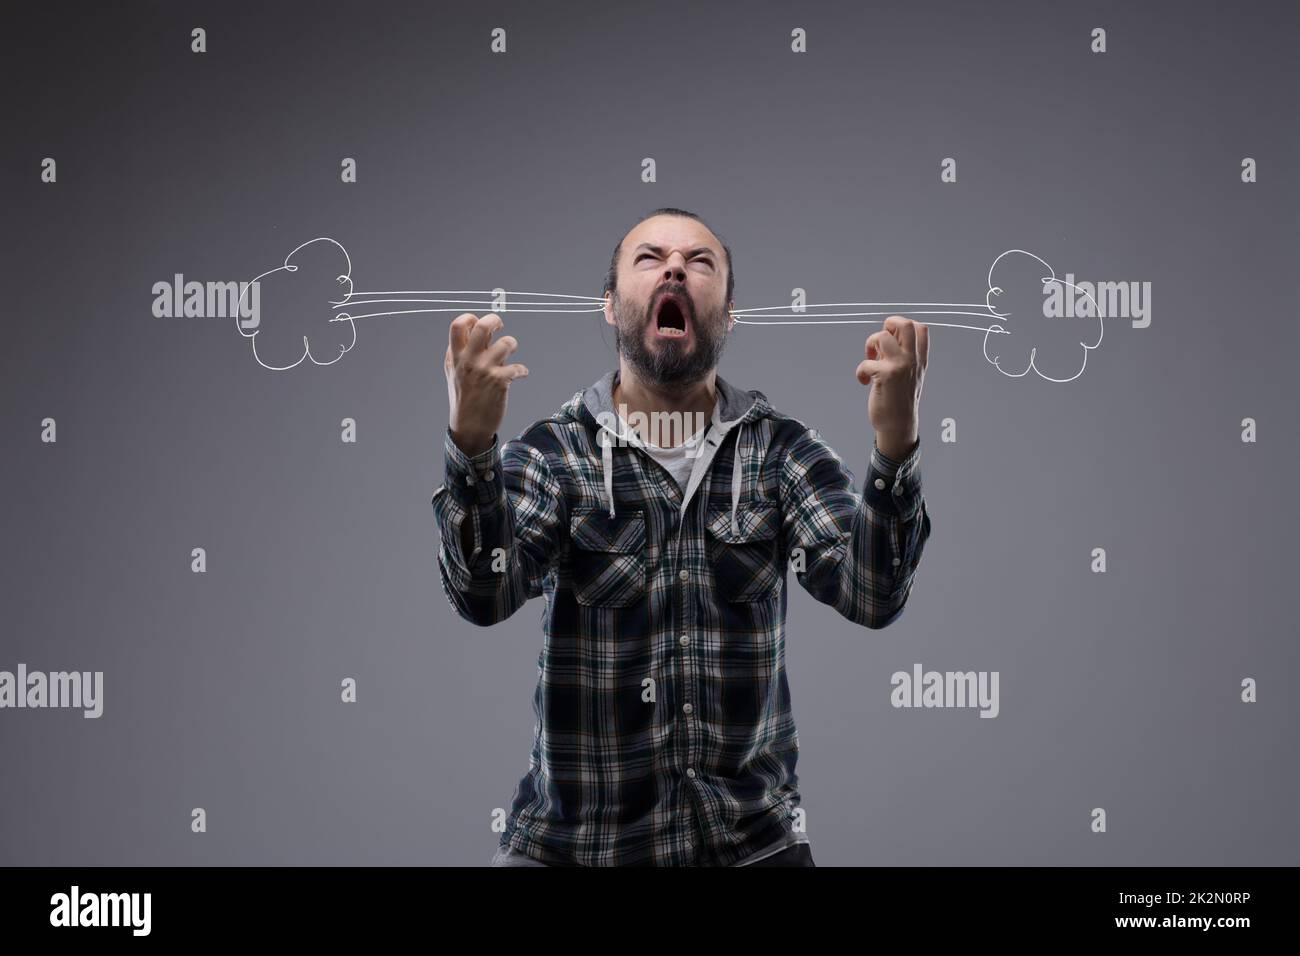 Very angry man letting off steam Stock Photo